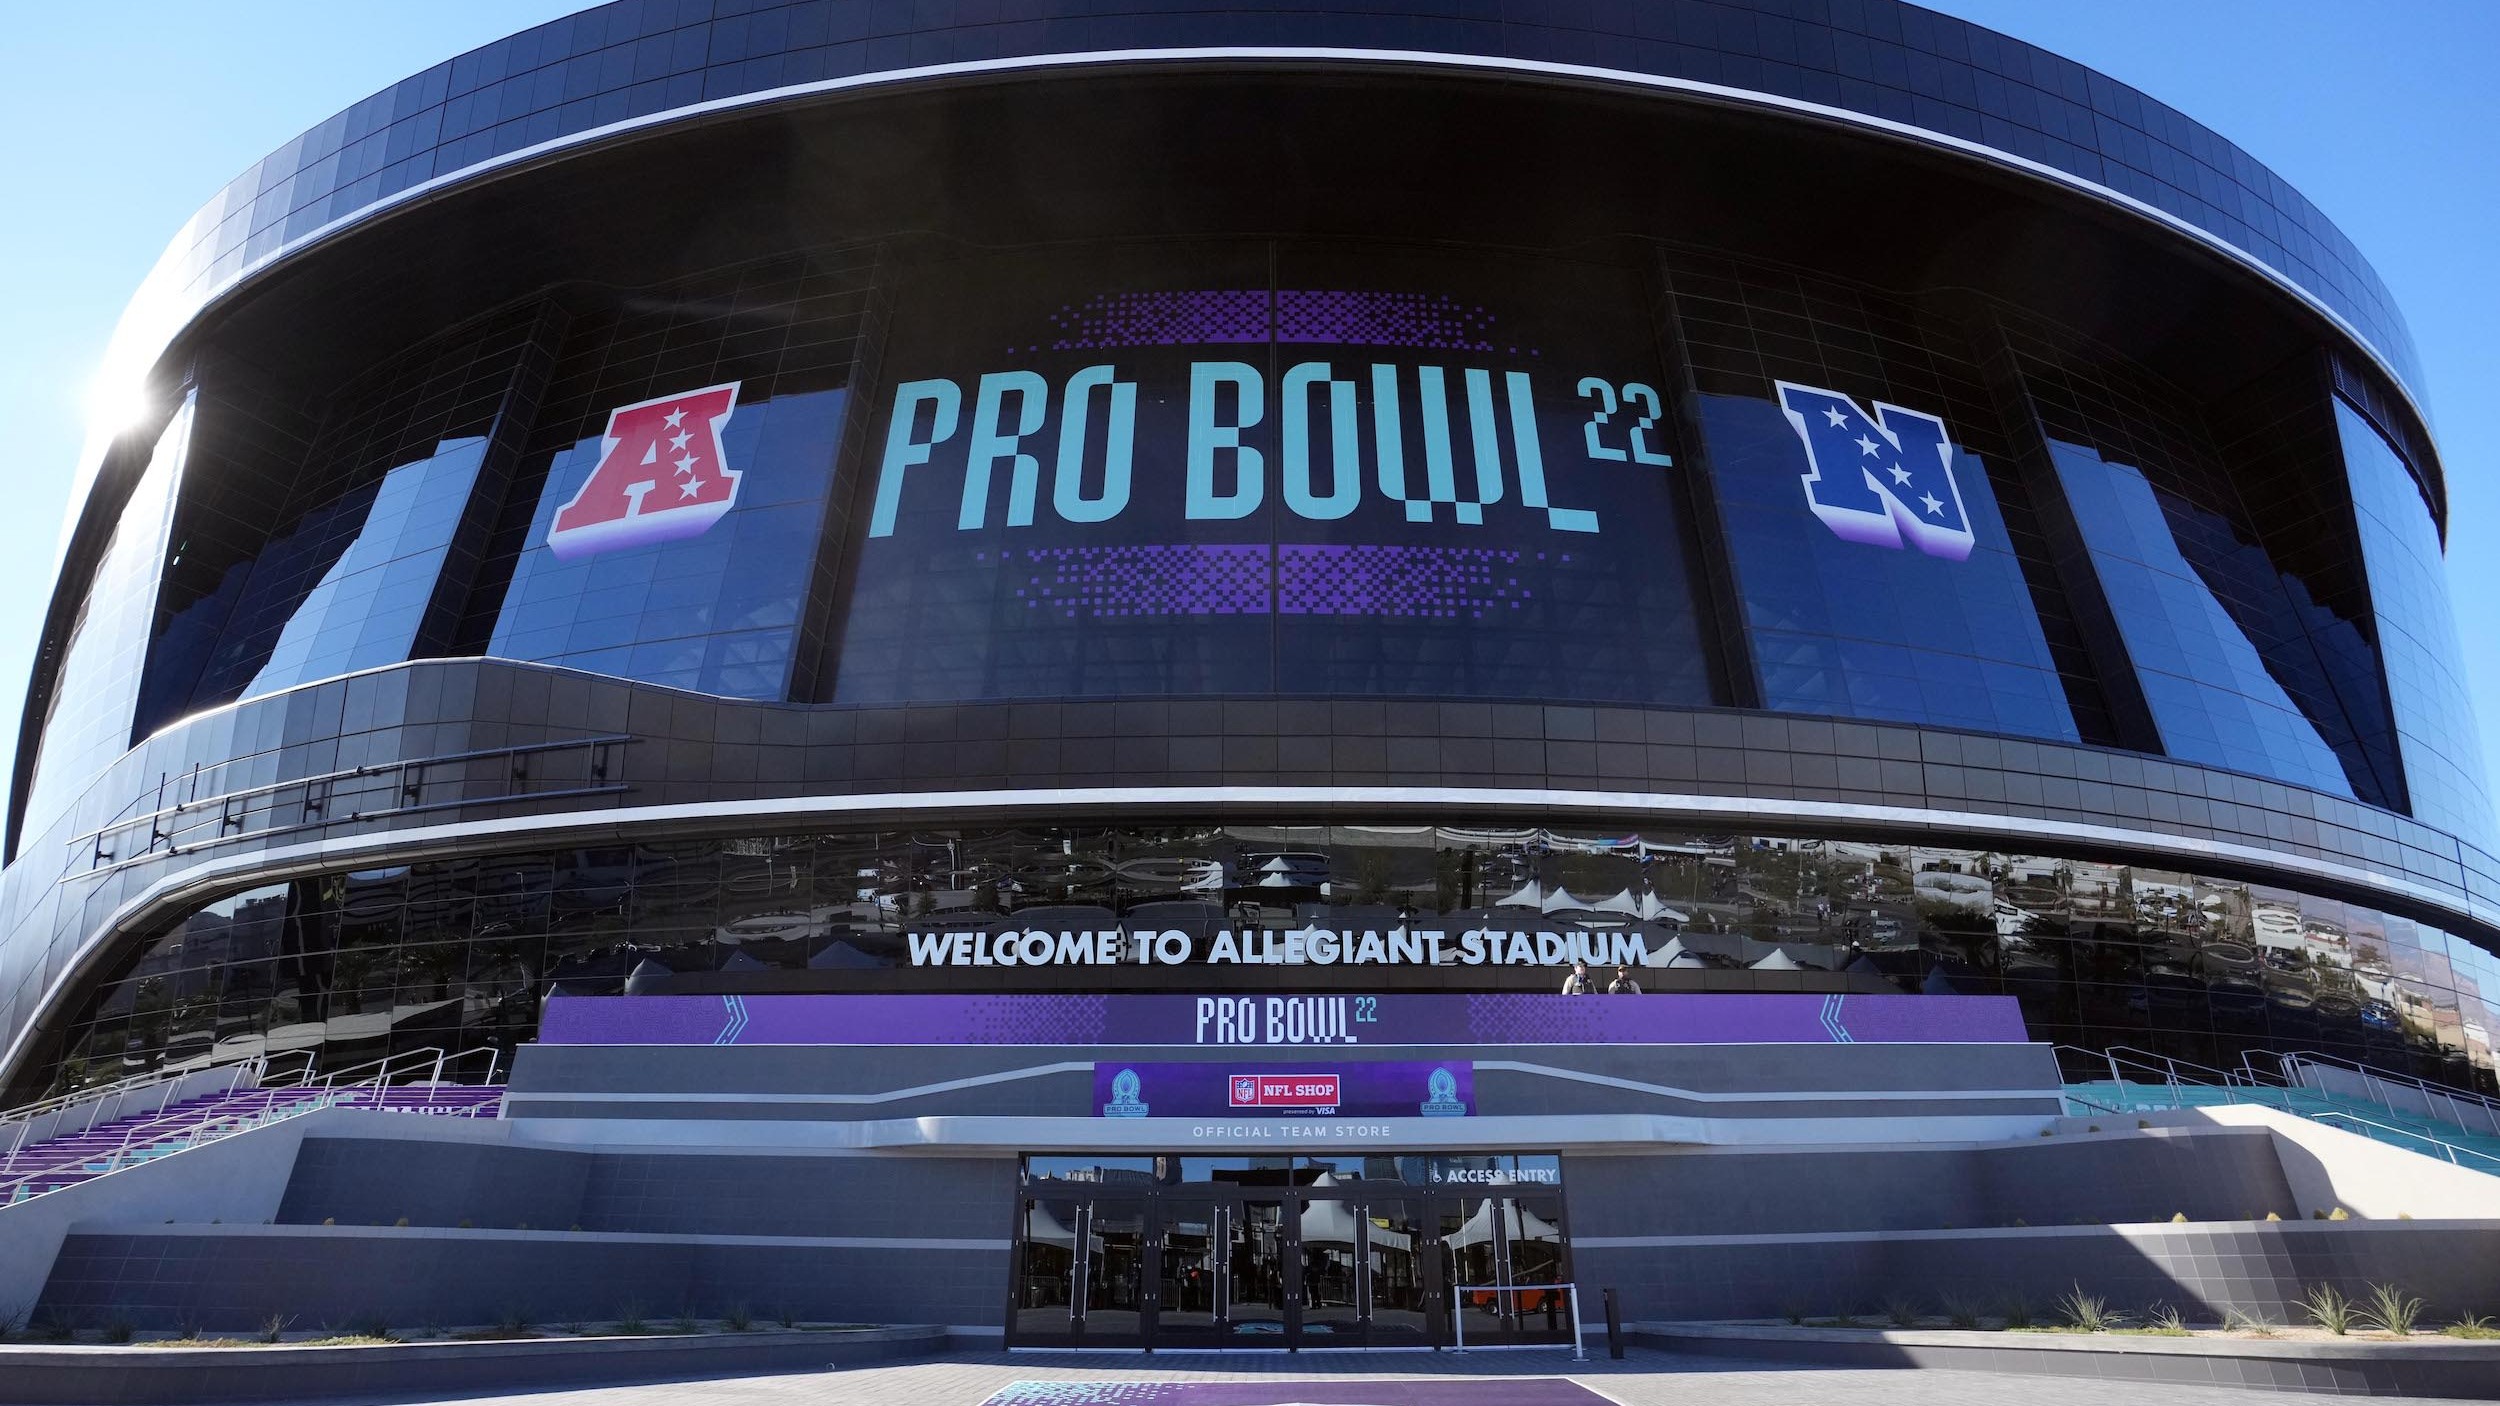 Pro Bowl 2023: How to watch, events, start time, TV schedule, streaming -  Pats Pulpit